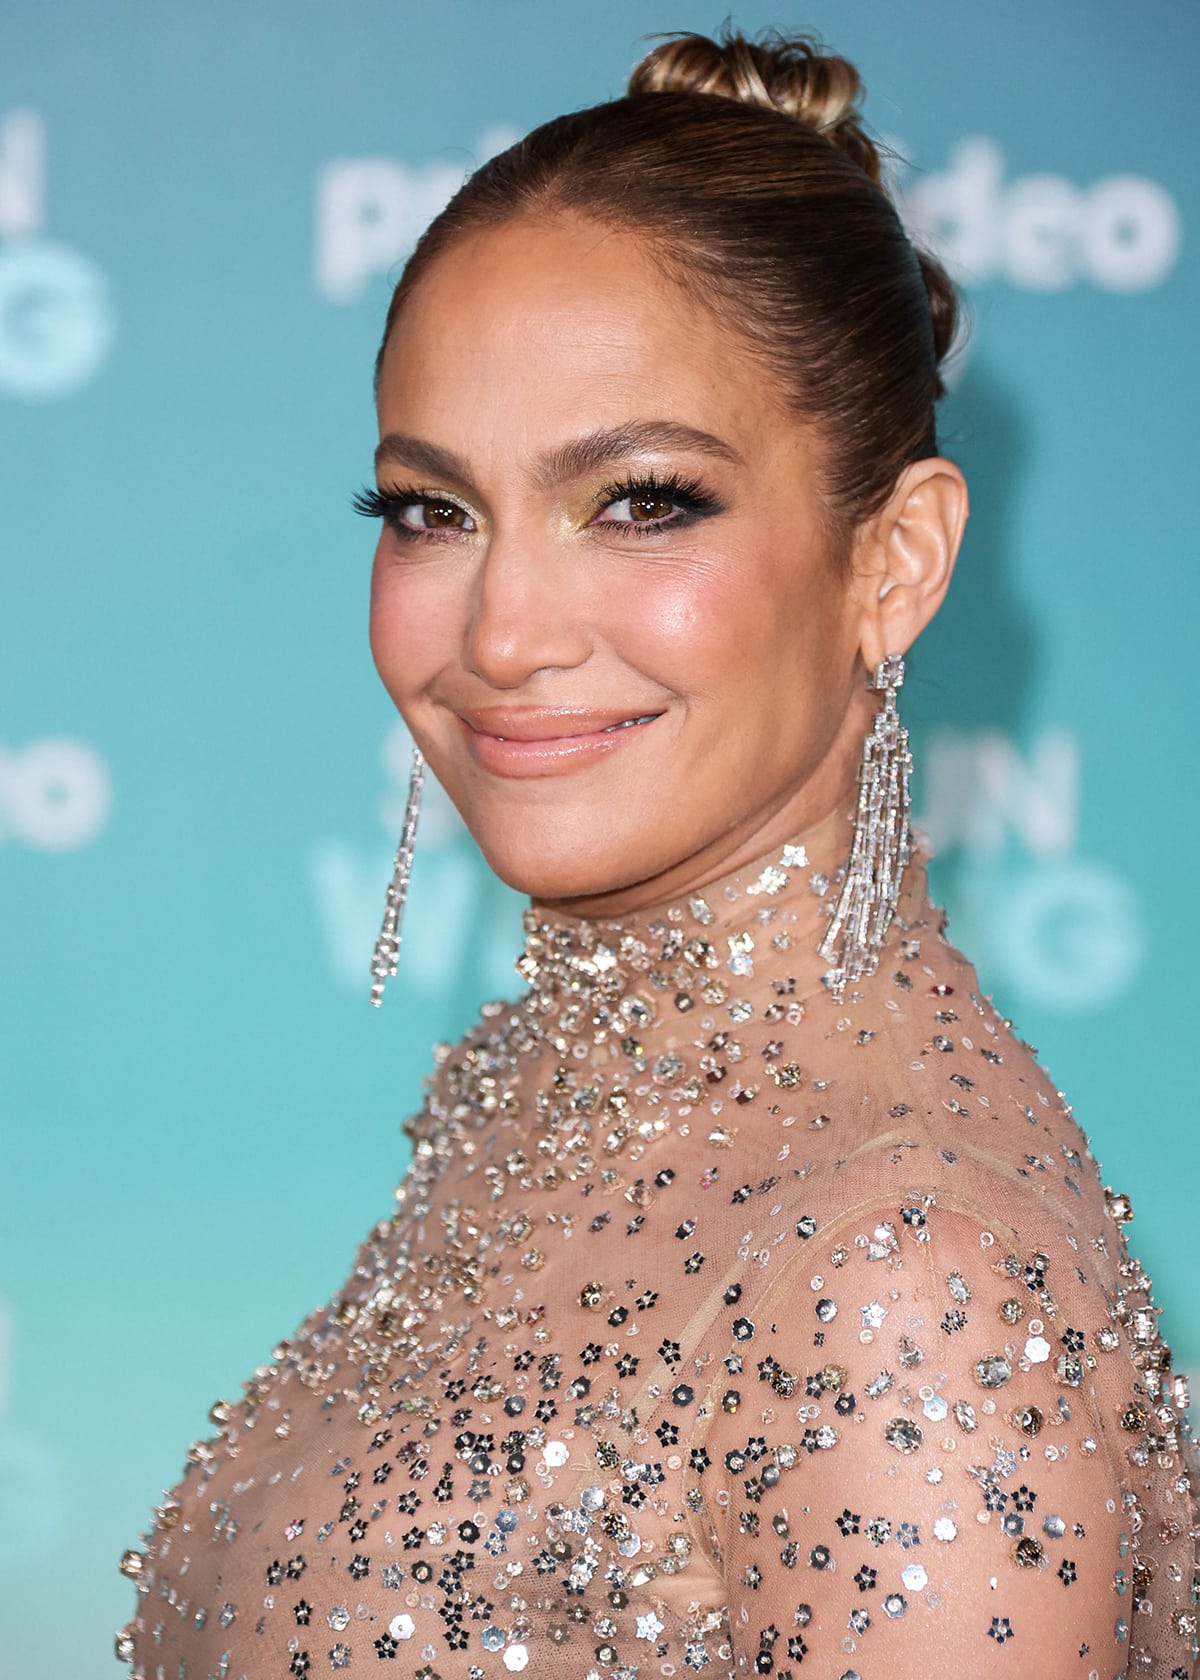 Jennifer Lopez adds more shimmer to her look with Shiphra diamond jewelry and glams up with metallic eyeshadow, false eyelashes, nude lip gloss, and a high bun